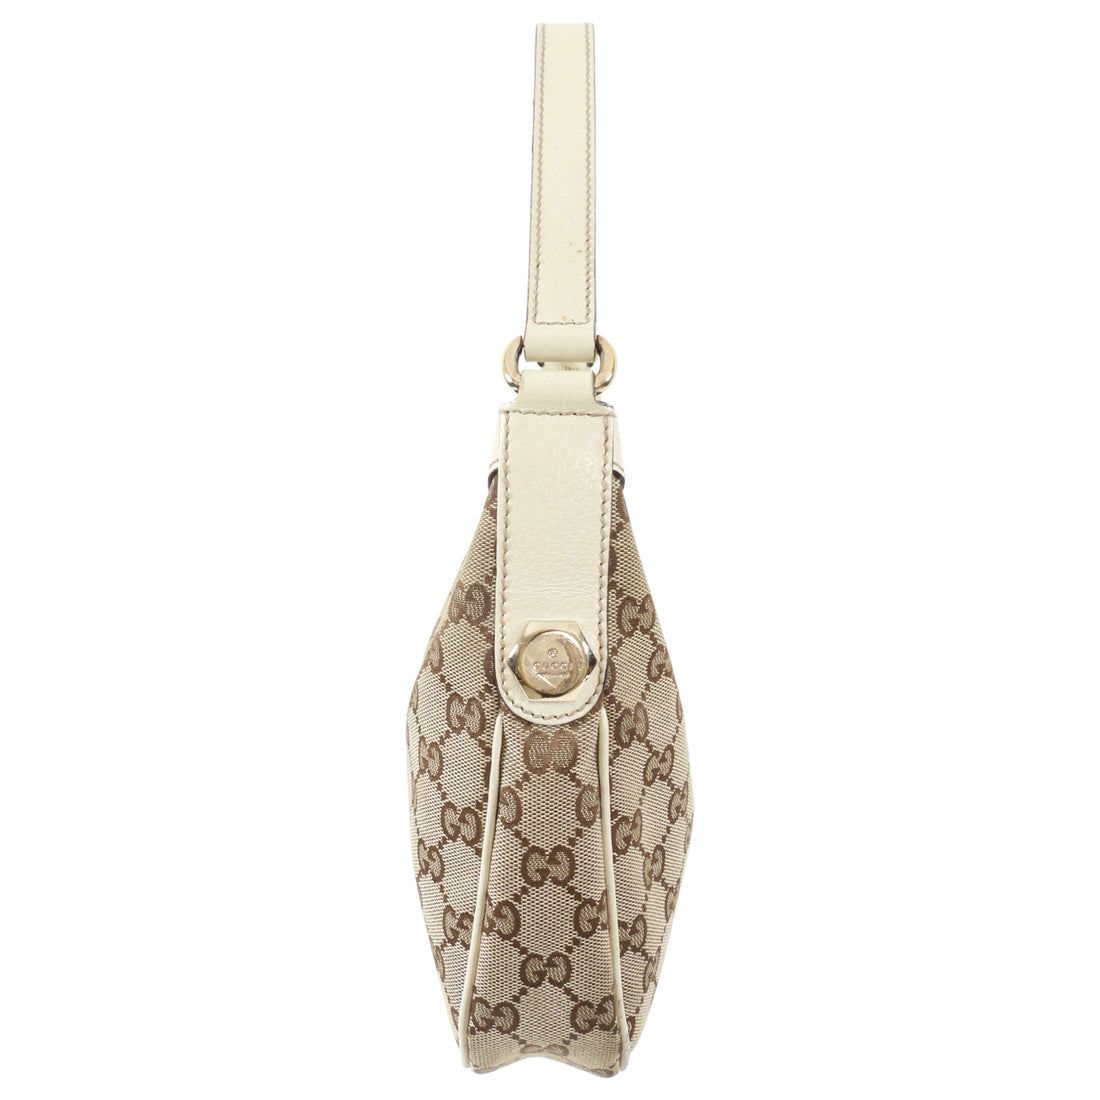 Gucci Ivory Small Monogram Canvas Hobo Bag – I MISS YOU VINTAGE